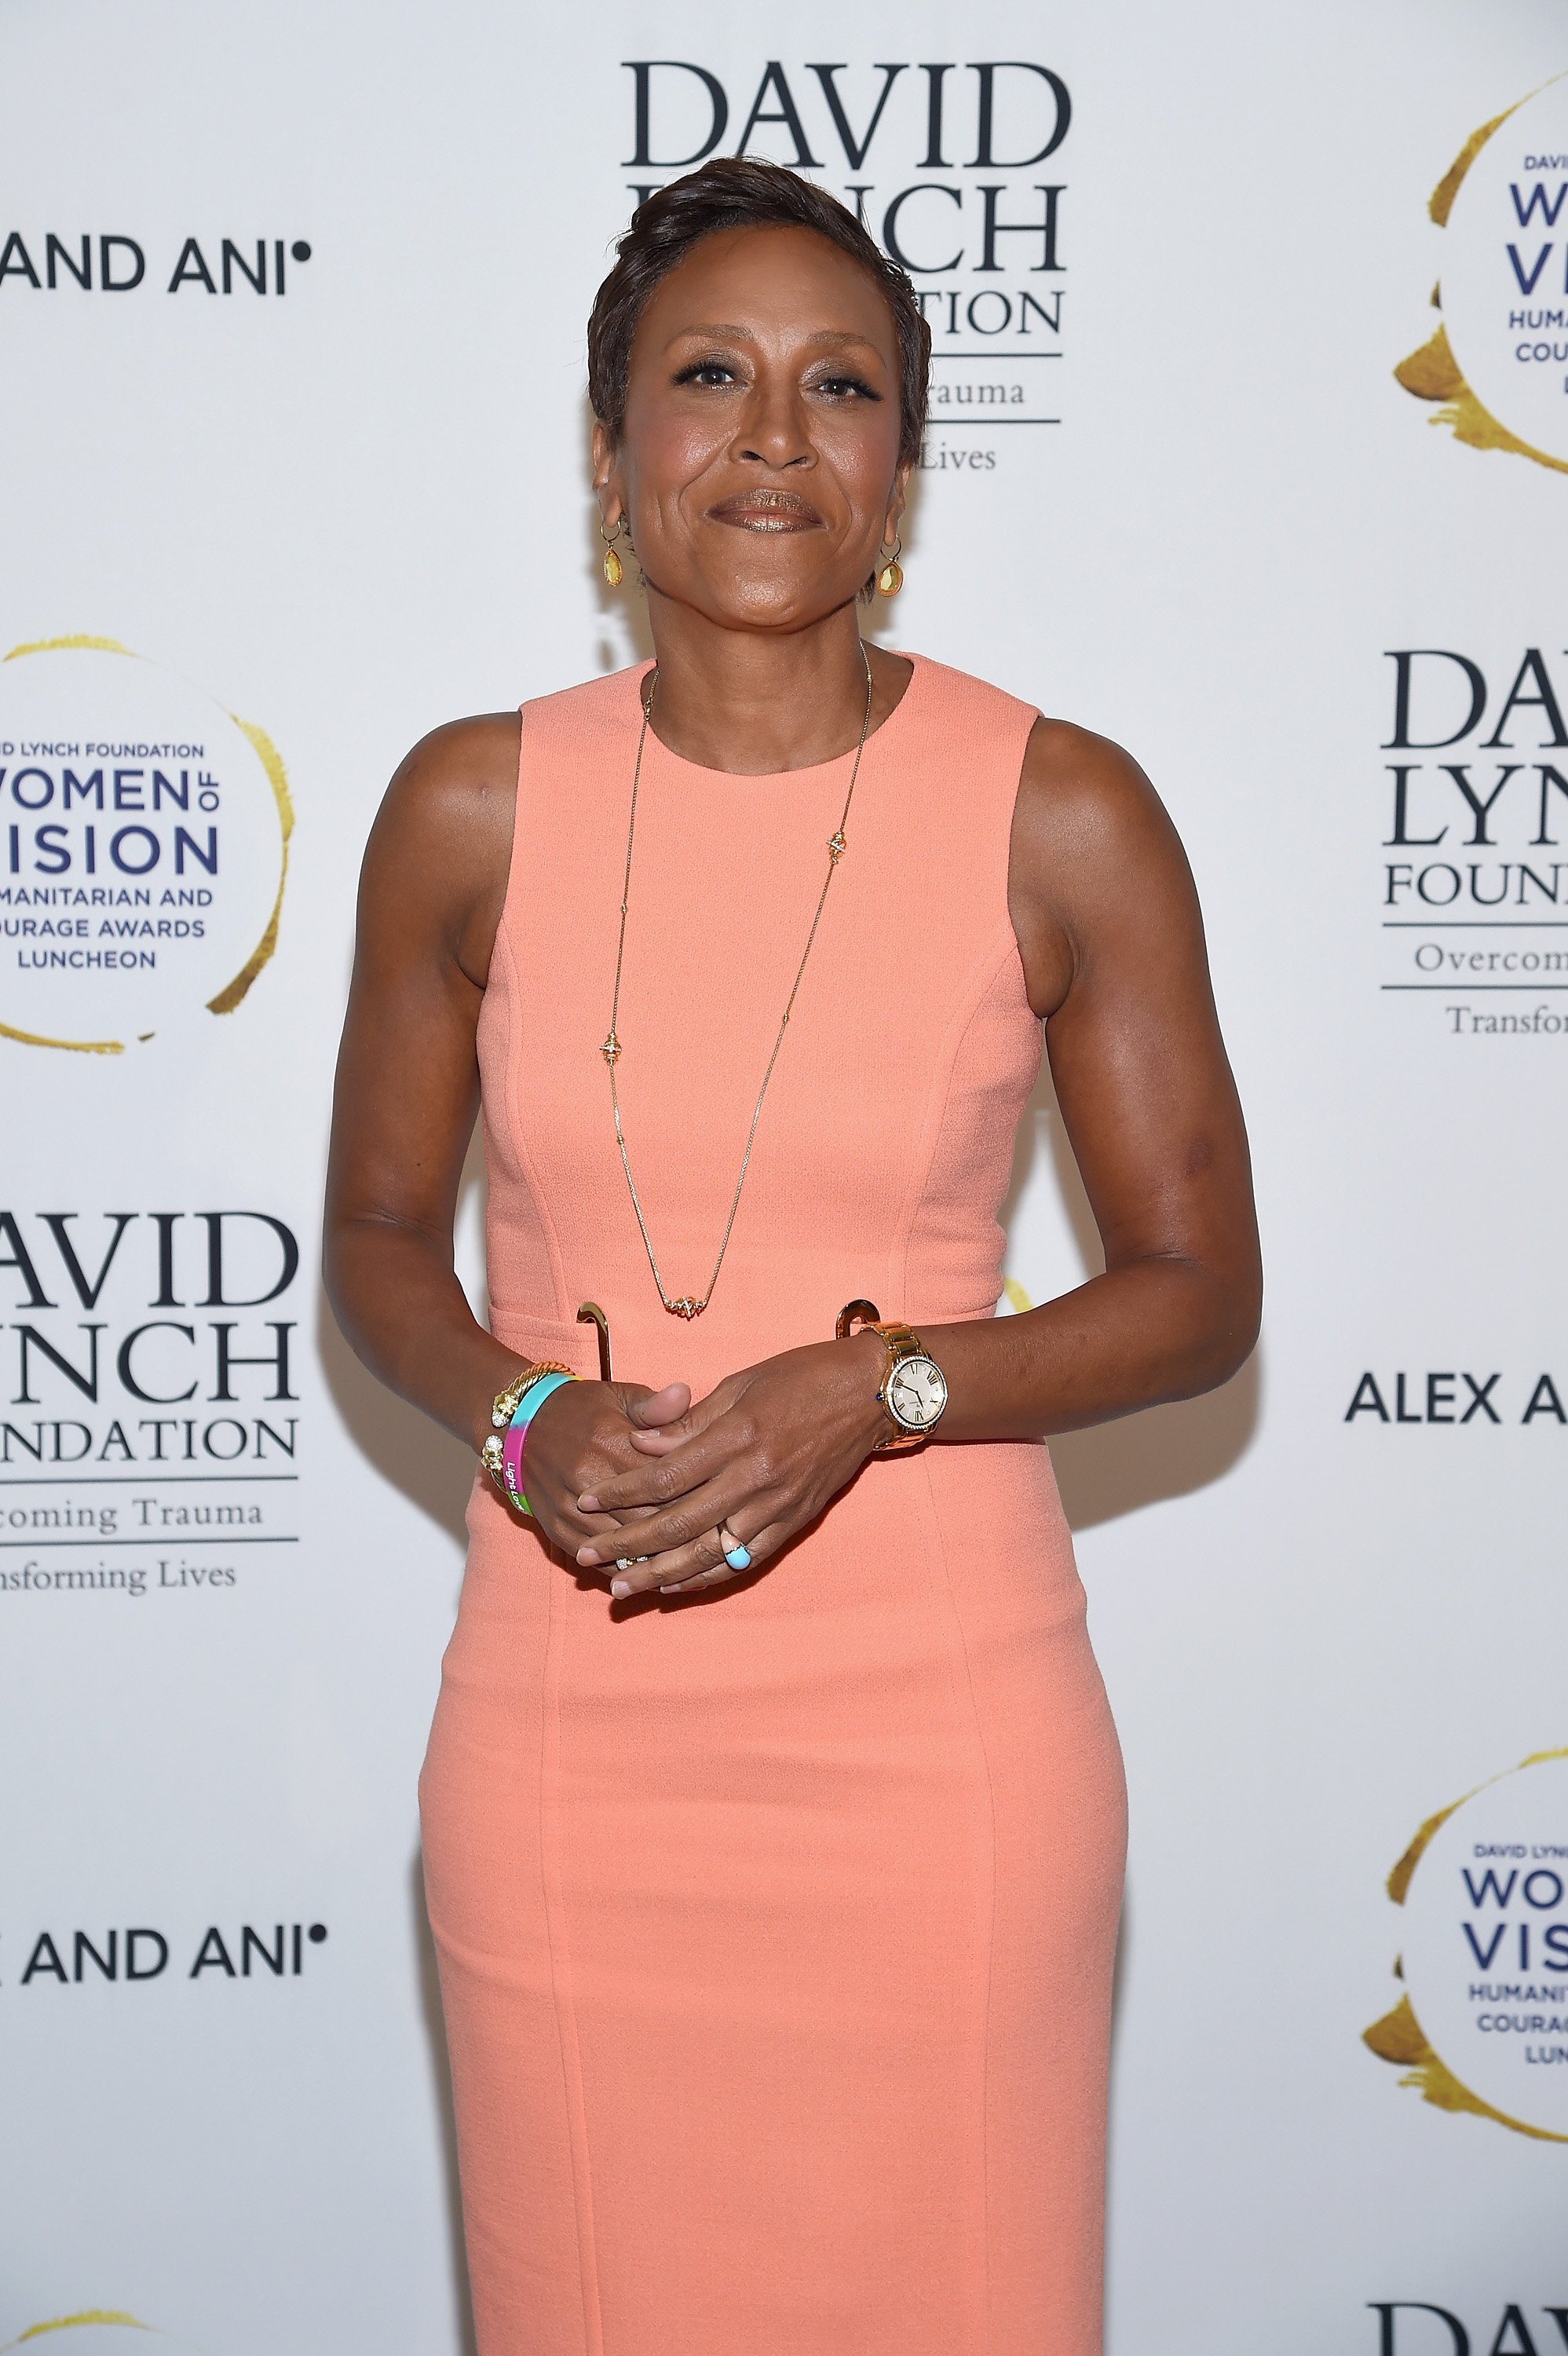 Robin Roberts at the David Lynch Foundation's "Women of Vision Awards" in May 2017. | Photo: Getty Images/GlobalImagesUkraine